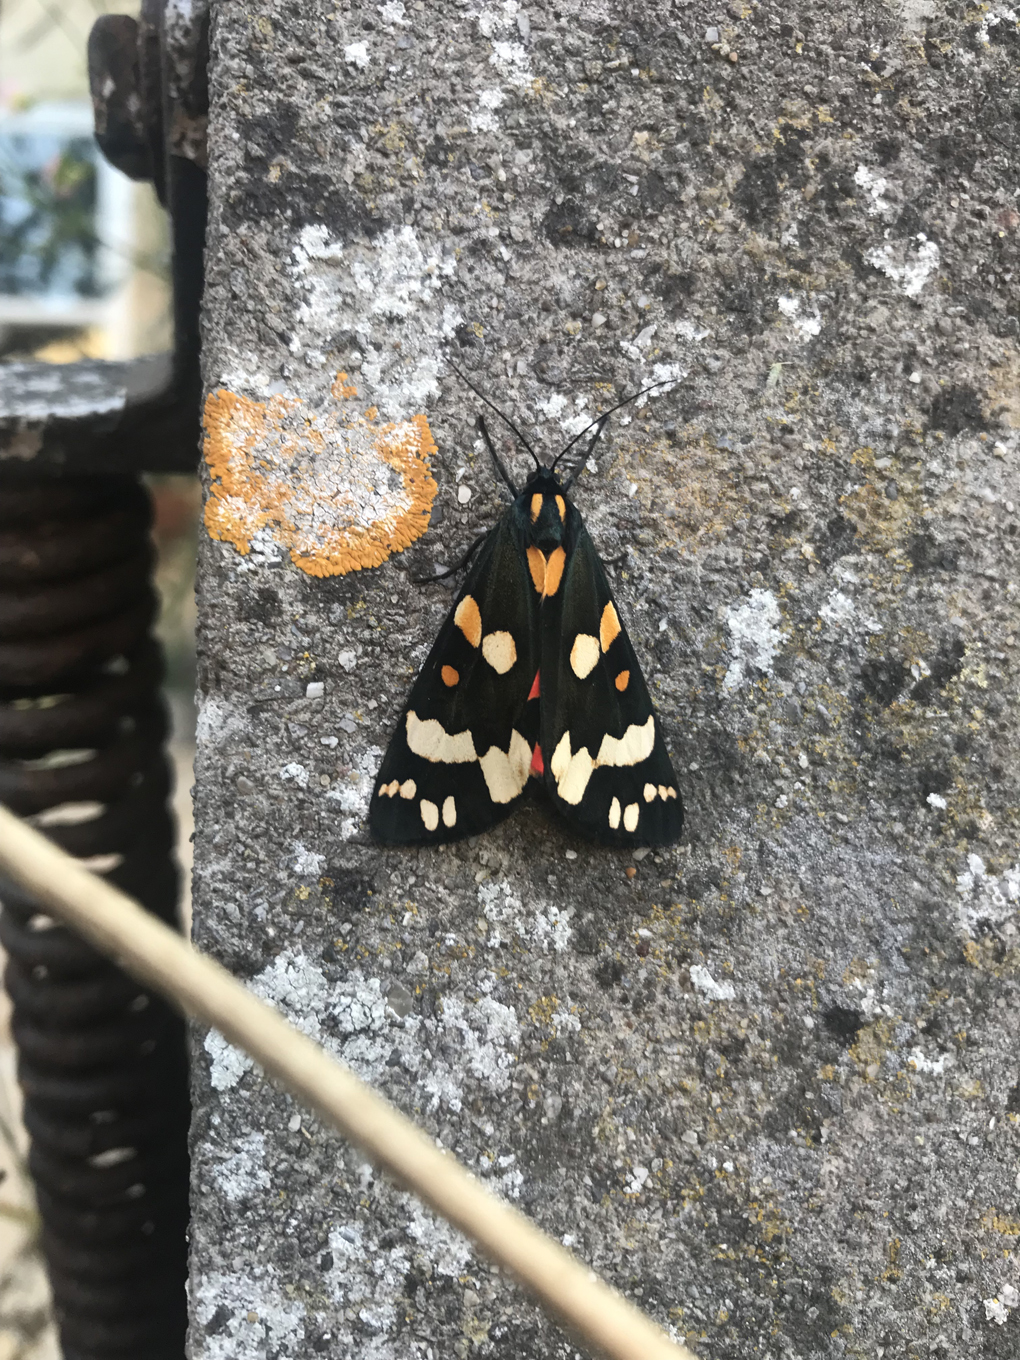 An orange and black butterfly resting on a rough stone wall